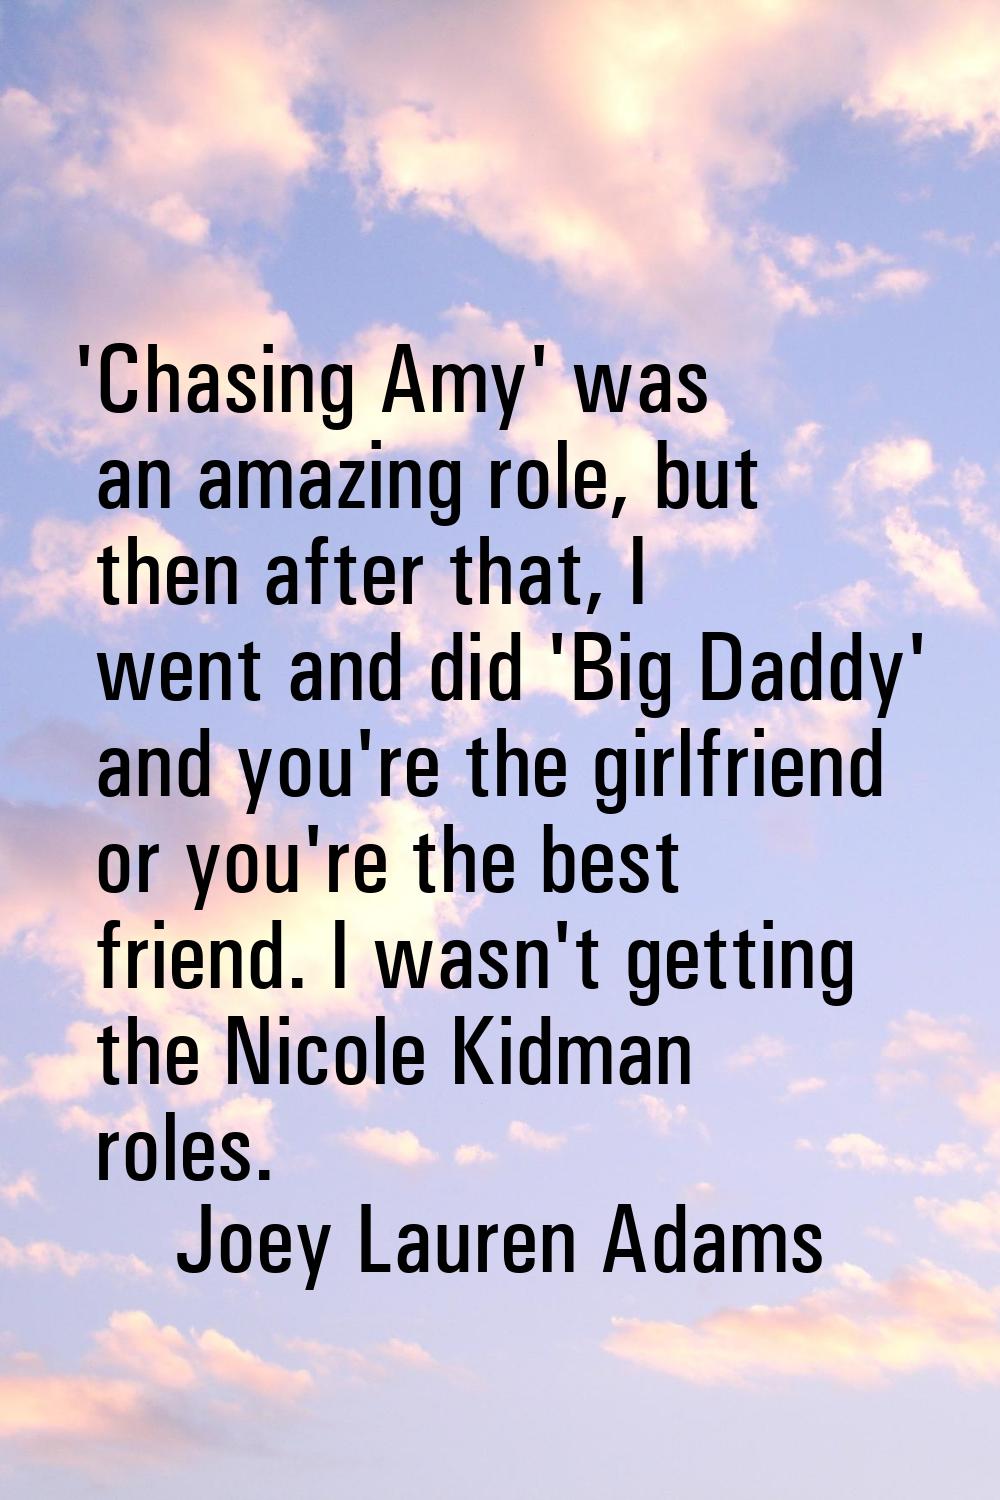 'Chasing Amy' was an amazing role, but then after that, I went and did 'Big Daddy' and you're the g